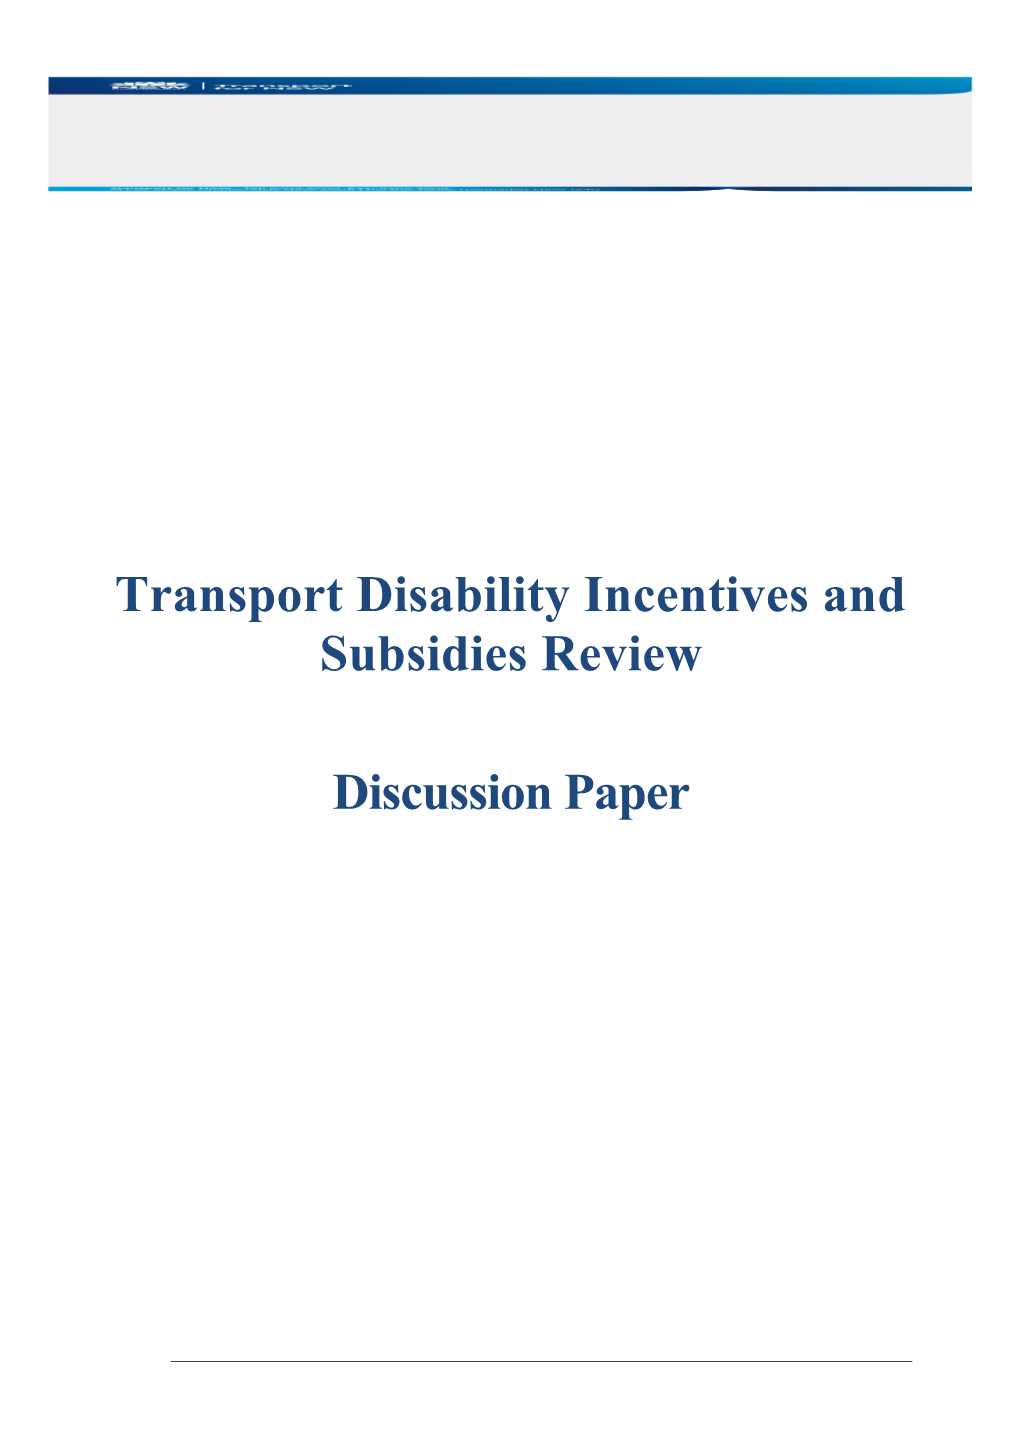 Transport Disability Incentives and Subsidies Review Discussion Paper September 2017